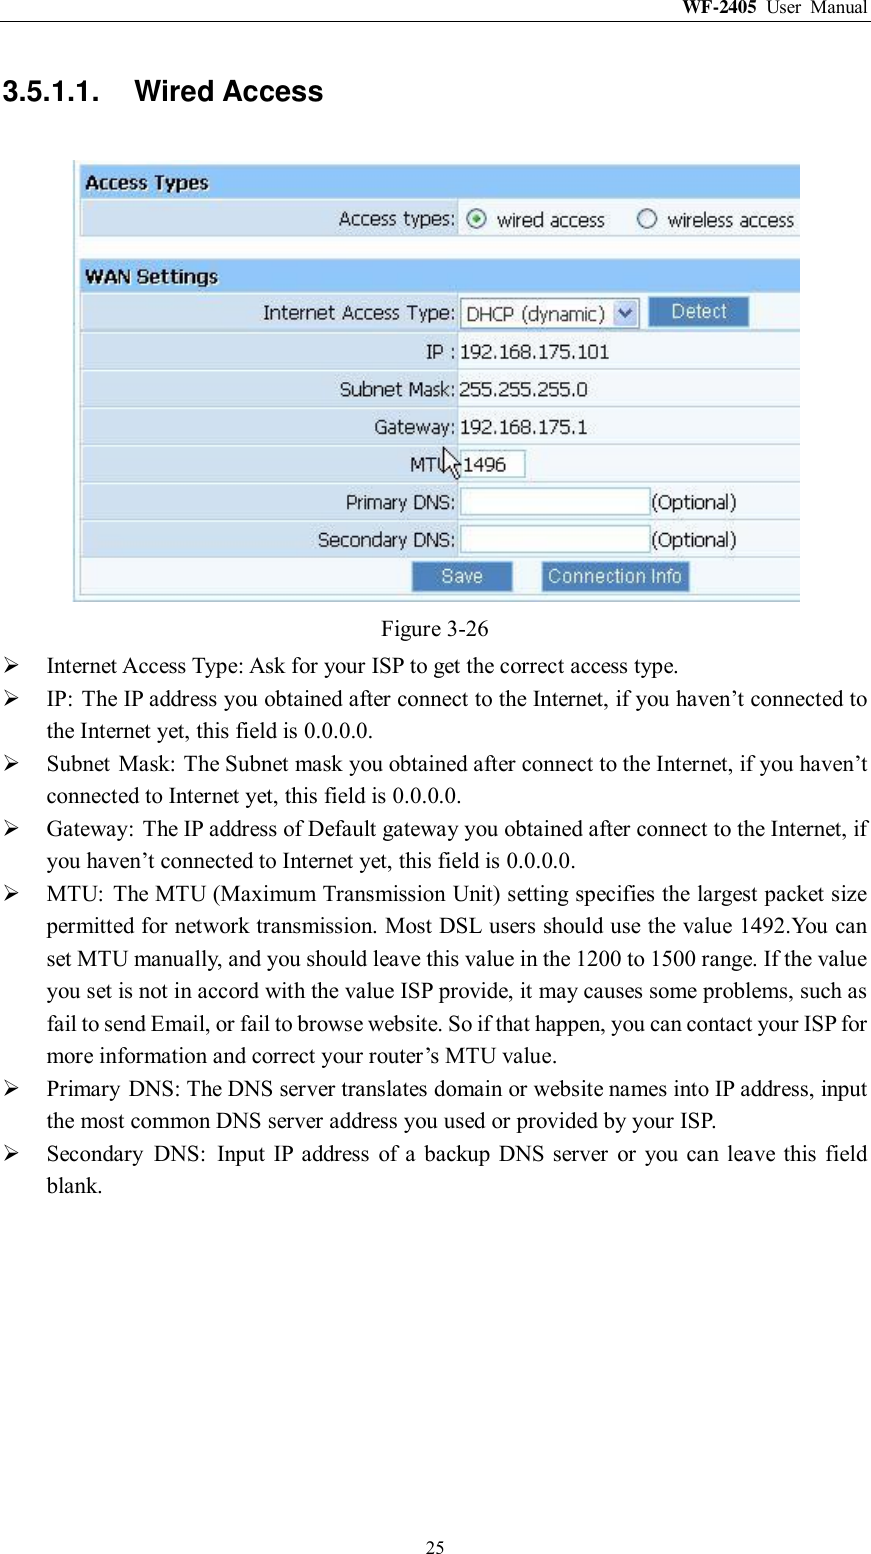 WF-2405  User  Manual  25 3.5.1.1.  Wired Access  Figure 3-26  Internet Access Type: Ask for your ISP to get the correct access type.  IP:  The IP address you obtained after connect to the Internet, if you haven‟t connected to the Internet yet, this field is 0.0.0.0.  Subnet  Mask: The Subnet mask you obtained after connect to the Internet, if you haven‟t connected to Internet yet, this field is 0.0.0.0.  Gateway:  The IP address of Default gateway you obtained after connect to the Internet, if you haven‟t connected to Internet yet, this field is 0.0.0.0.  MTU:  The MTU (Maximum Transmission Unit) setting specifies the largest packet size permitted for network transmission. Most DSL users should use the value 1492.You can set MTU manually, and you should leave this value in the 1200 to 1500 range. If the value you set is not in accord with the value ISP provide, it may causes some problems, such as fail to send Email, or fail to browse website. So if that happen, you can contact your ISP for more information and correct your router‟s MTU value.  Primary  DNS: The DNS server translates domain or website names into IP address, input the most common DNS server address you used or provided by your ISP.  Secondary  DNS:  Input IP  address  of  a  backup DNS server  or  you can  leave this field blank. 